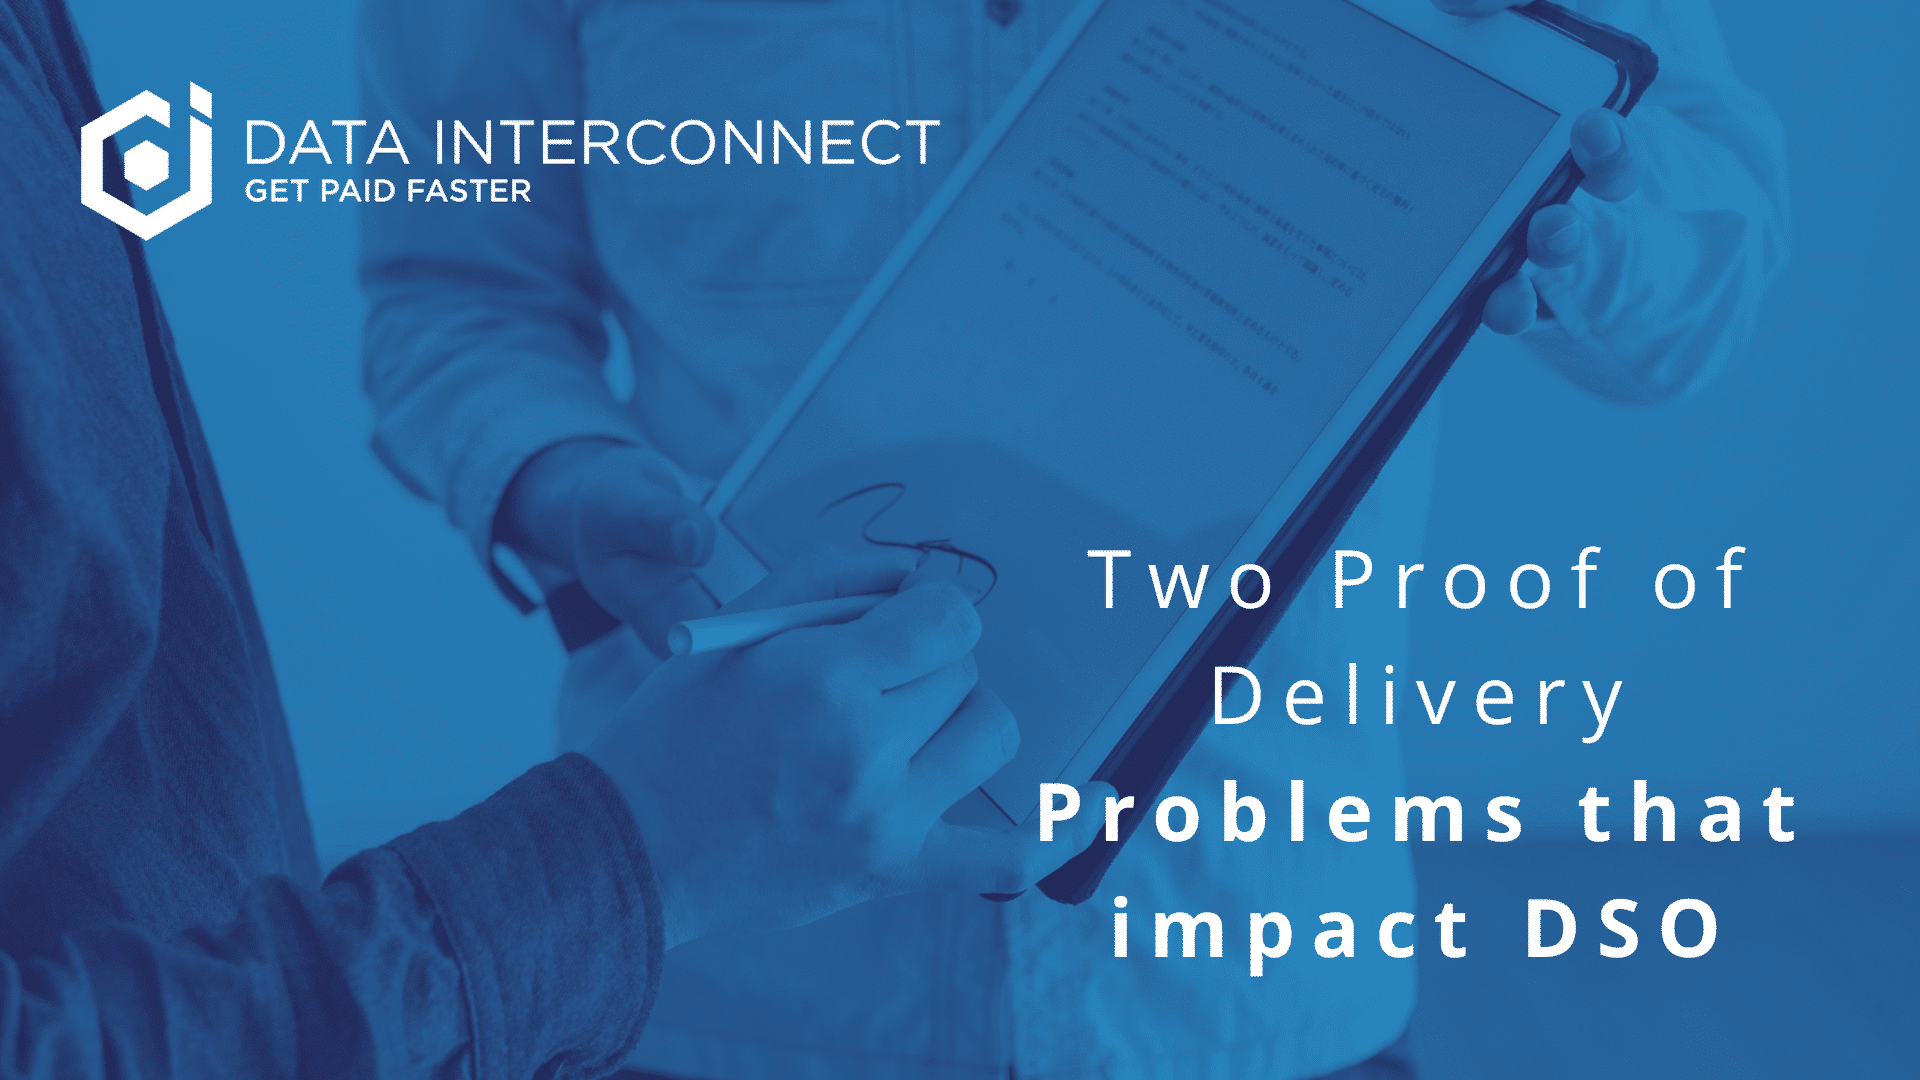 Two Proof of Delivery Problems that impact DSO